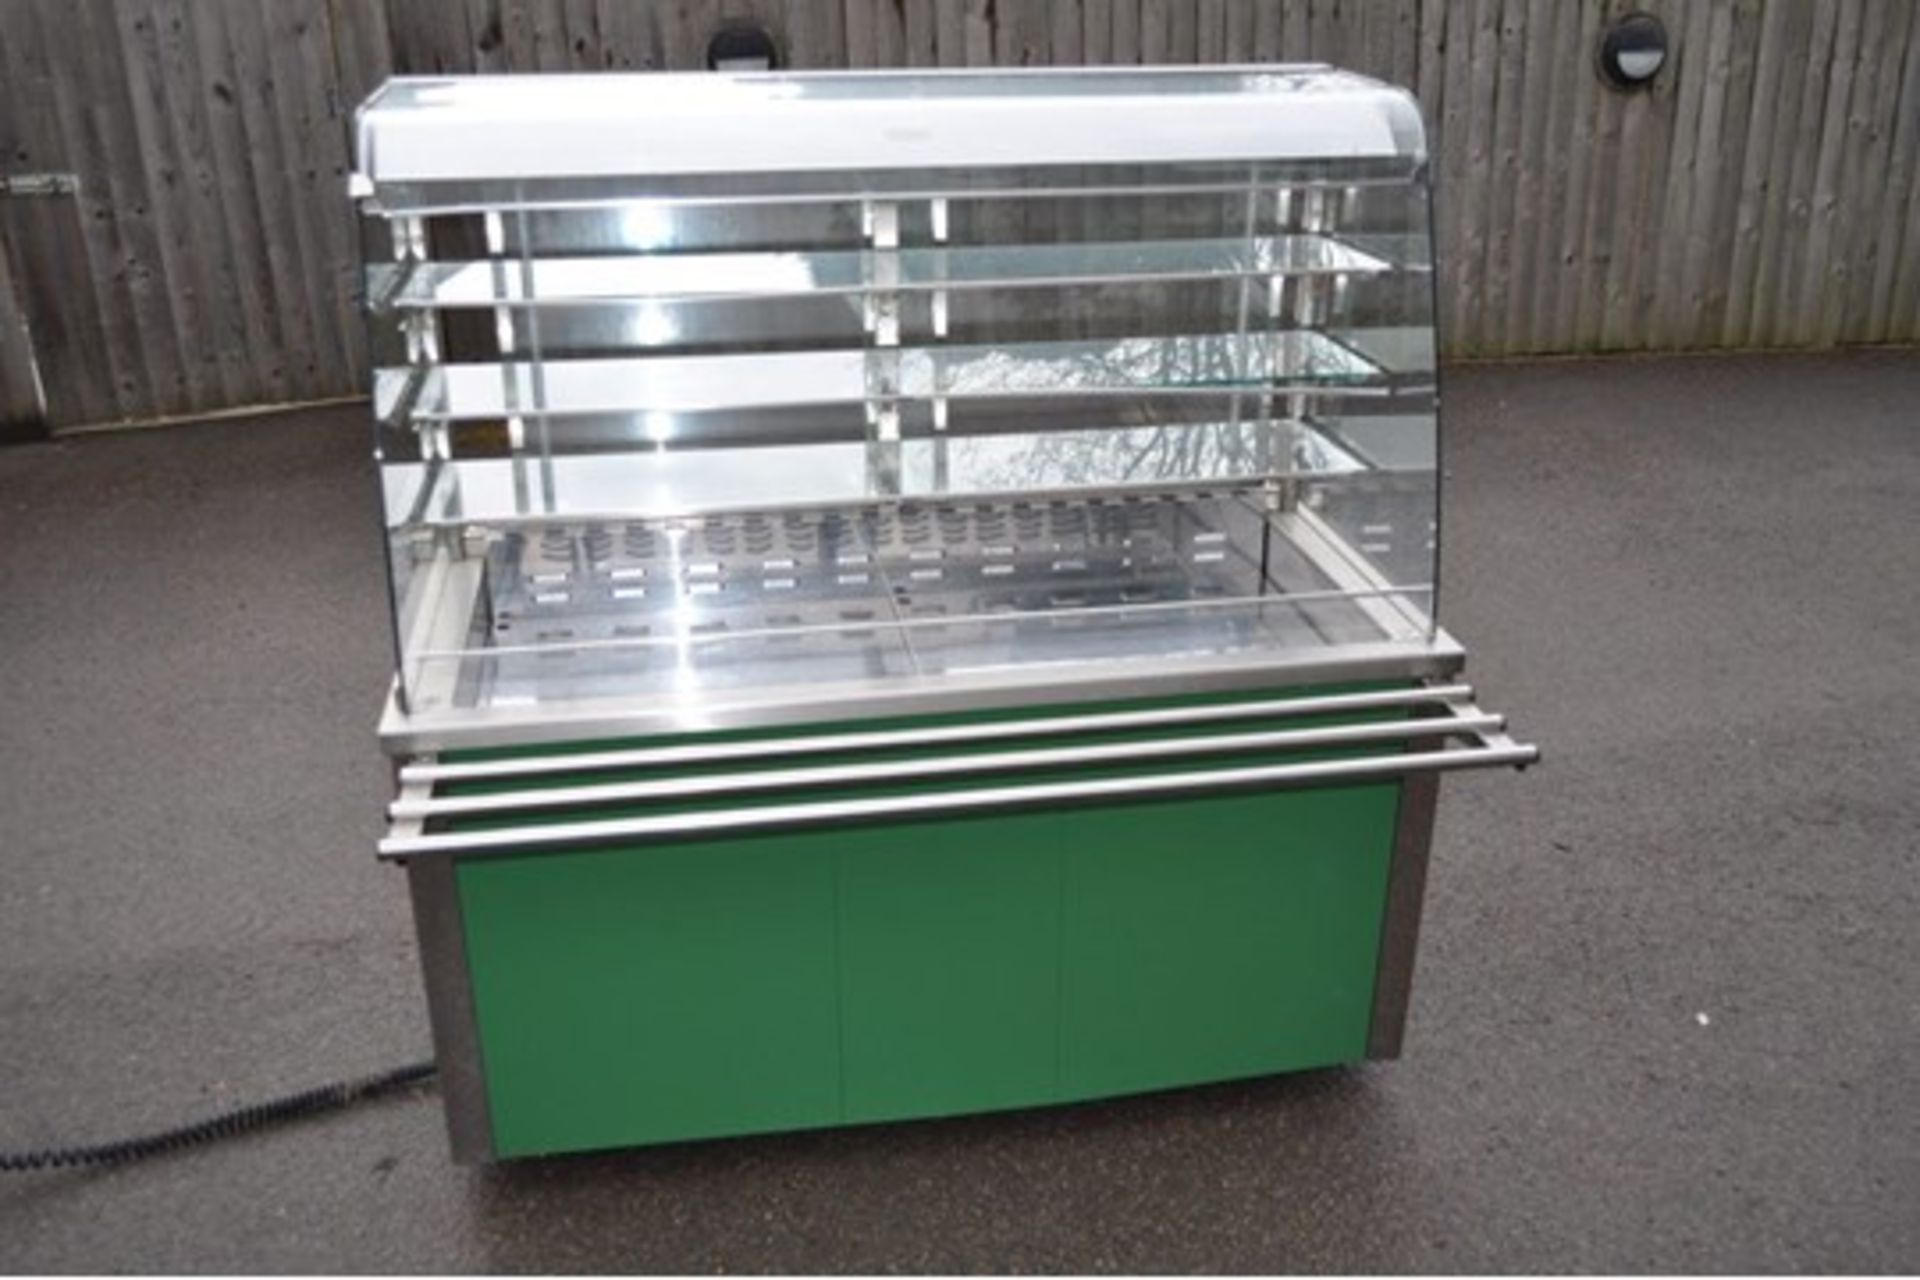 Moffat Refrigerated Counter Section With Chilled Display over 1490mm Serial number 32010/01/09 2BEl